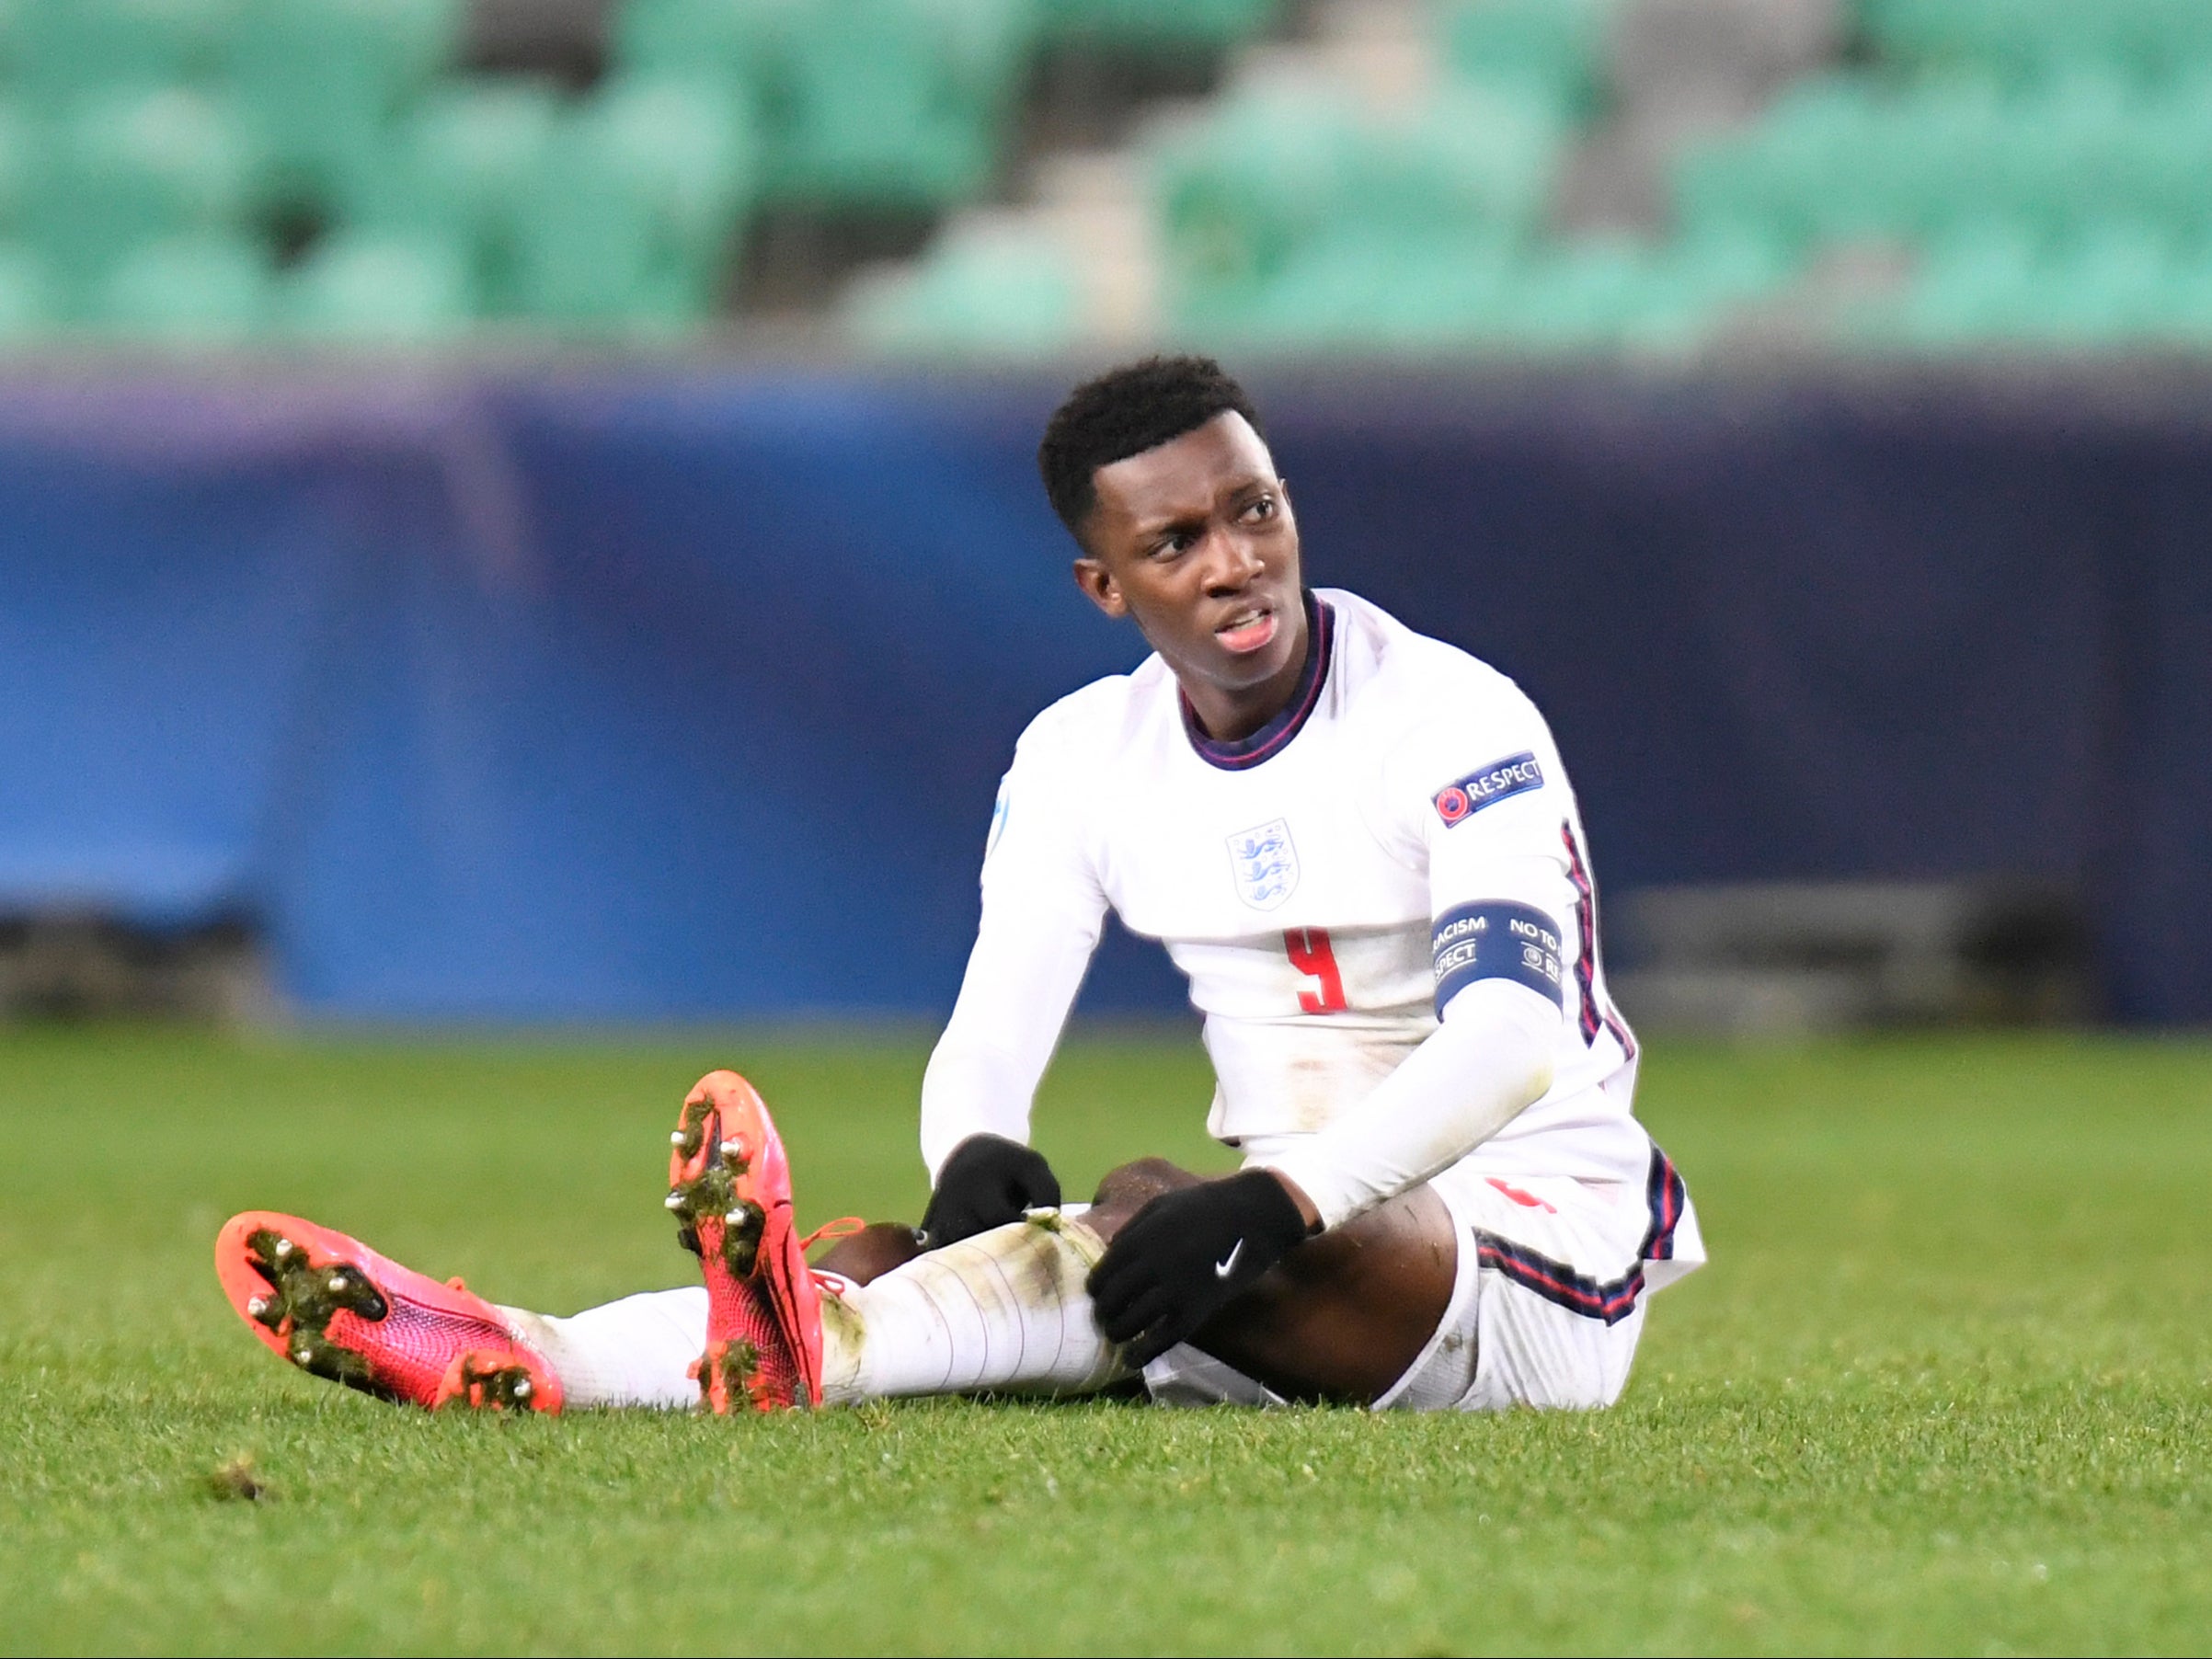 Eddie Nketiah of England reacts after defeat to Portugal at 2021 UEFA European Under-21 Championship